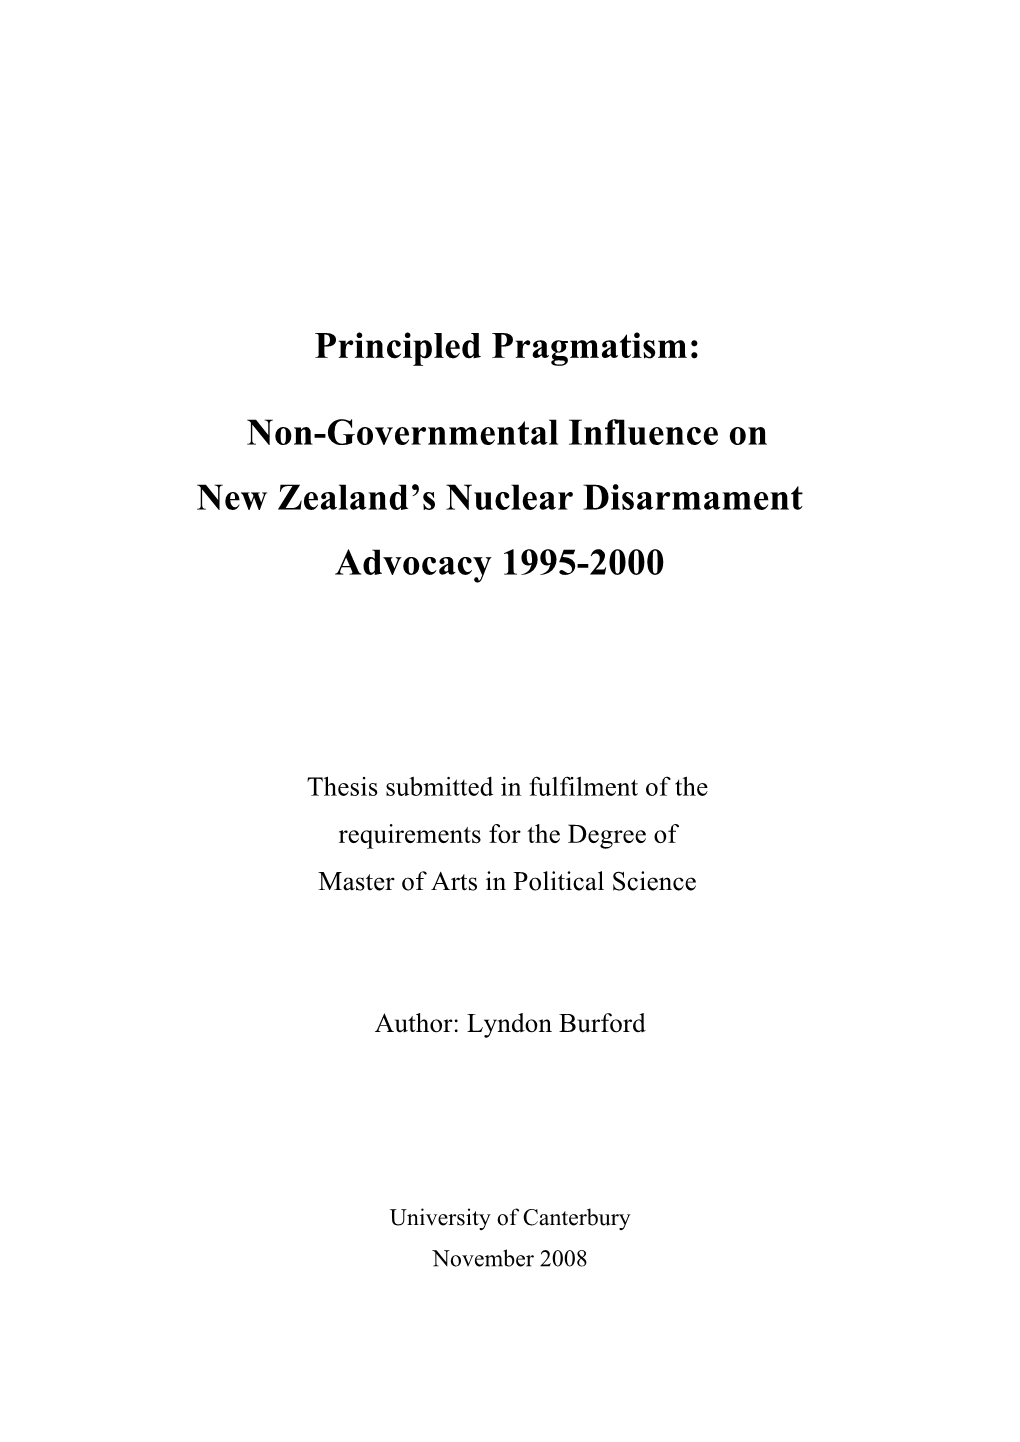 Non-Governmental Influence on New Zealand's Nuclear Disarmament